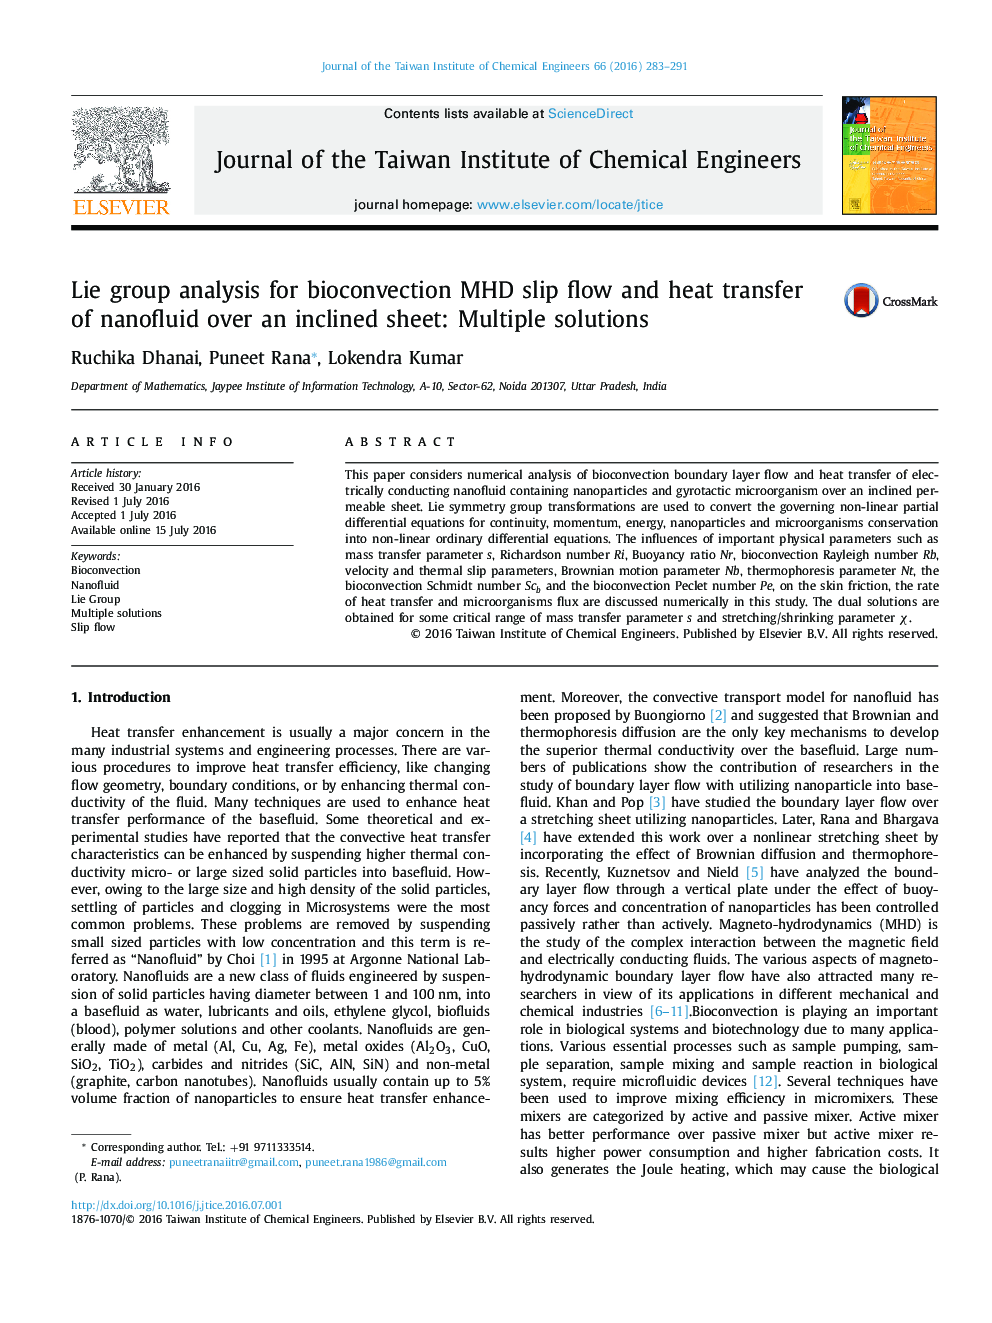 Lie group analysis for bioconvection MHD slip flow and heat transfer of nanofluid over an inclined sheet: Multiple solutions